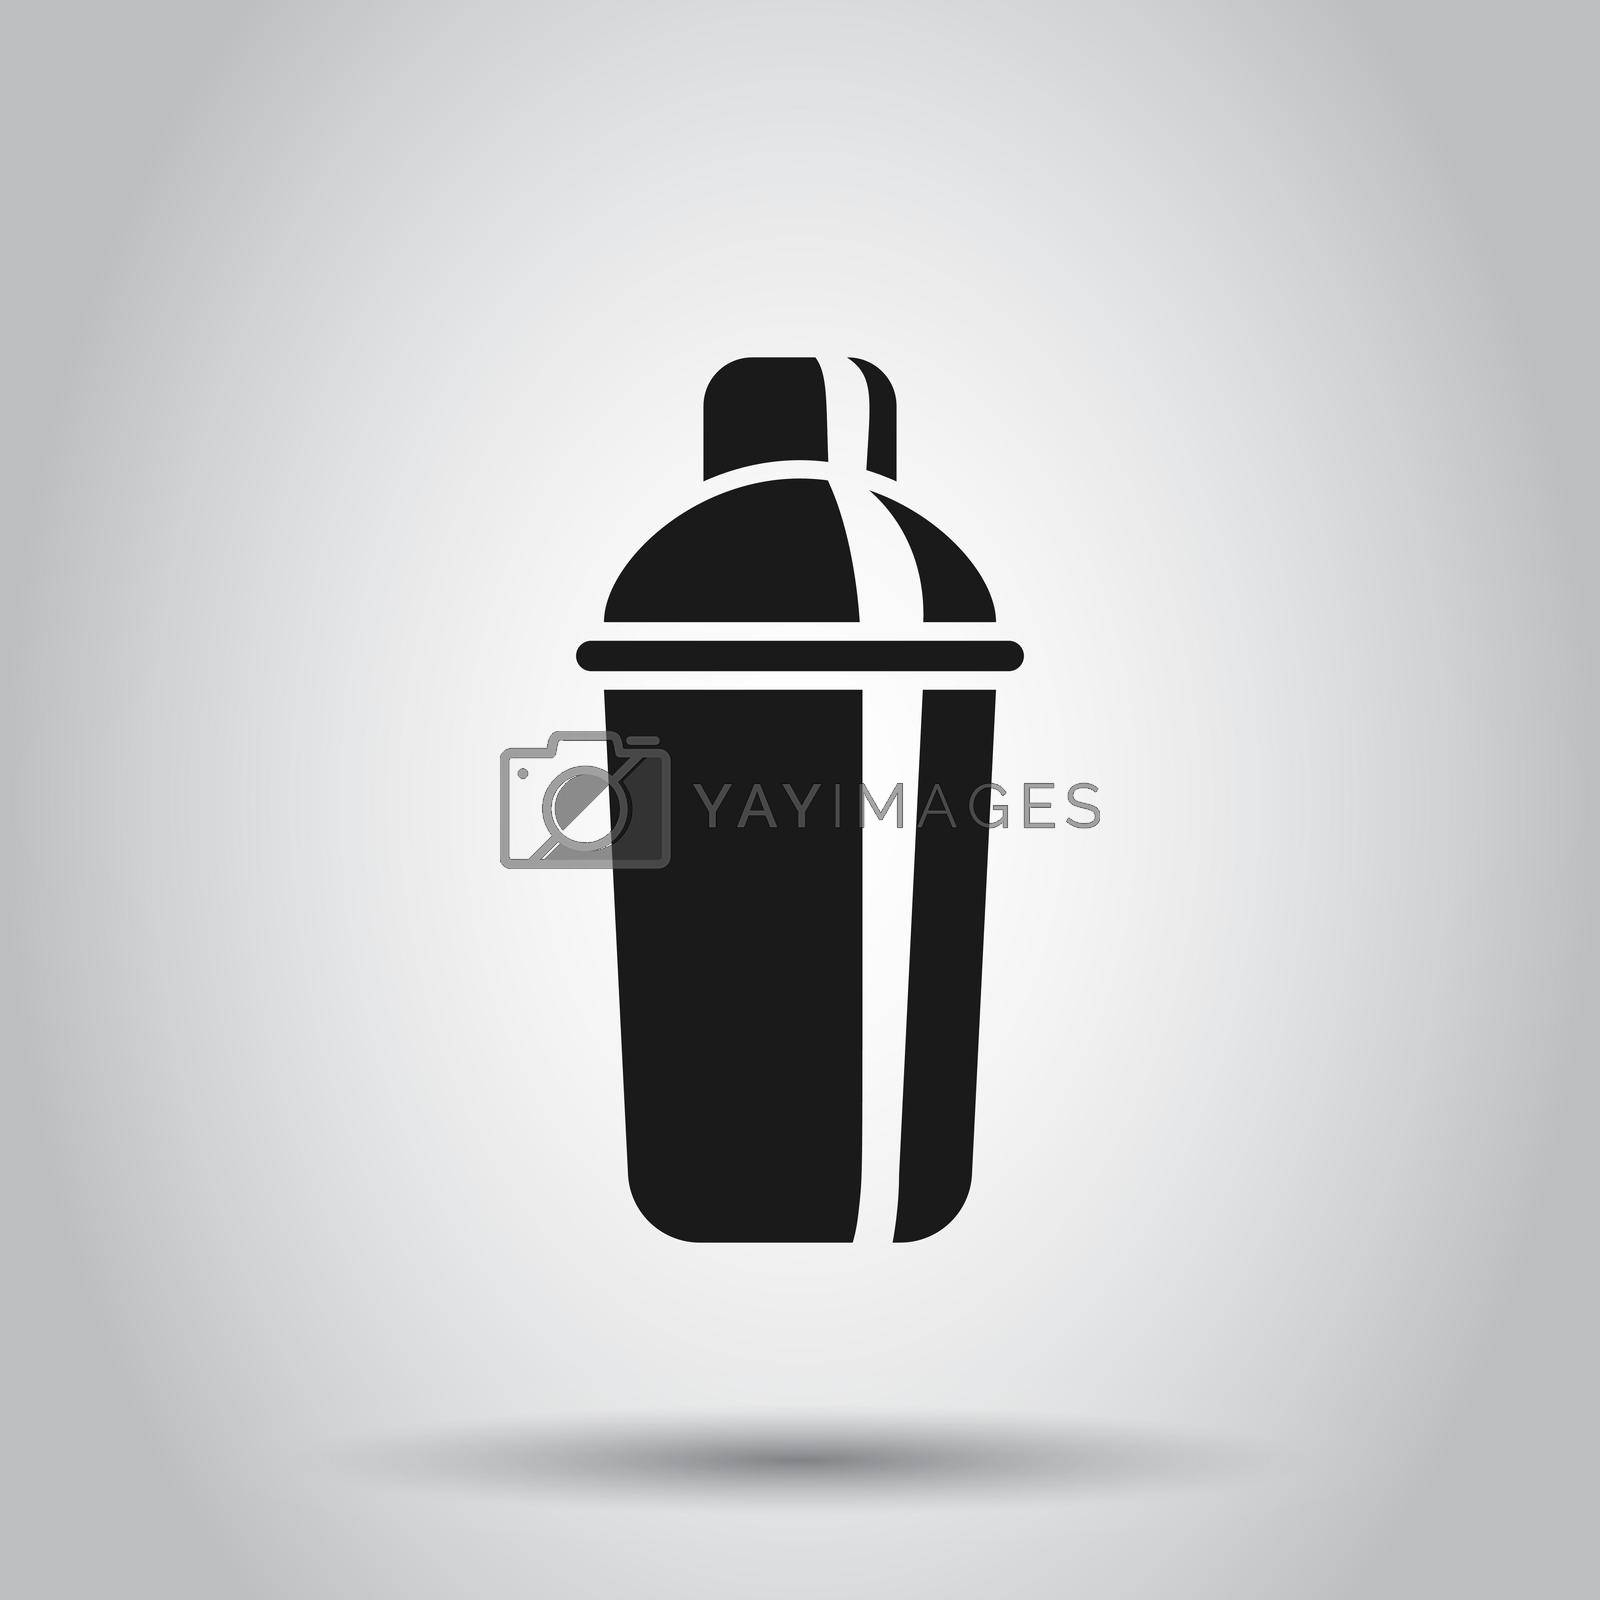 Shaker icon in flat style. Sport bottle vector illustration on isolated background. Fitness container business concept.